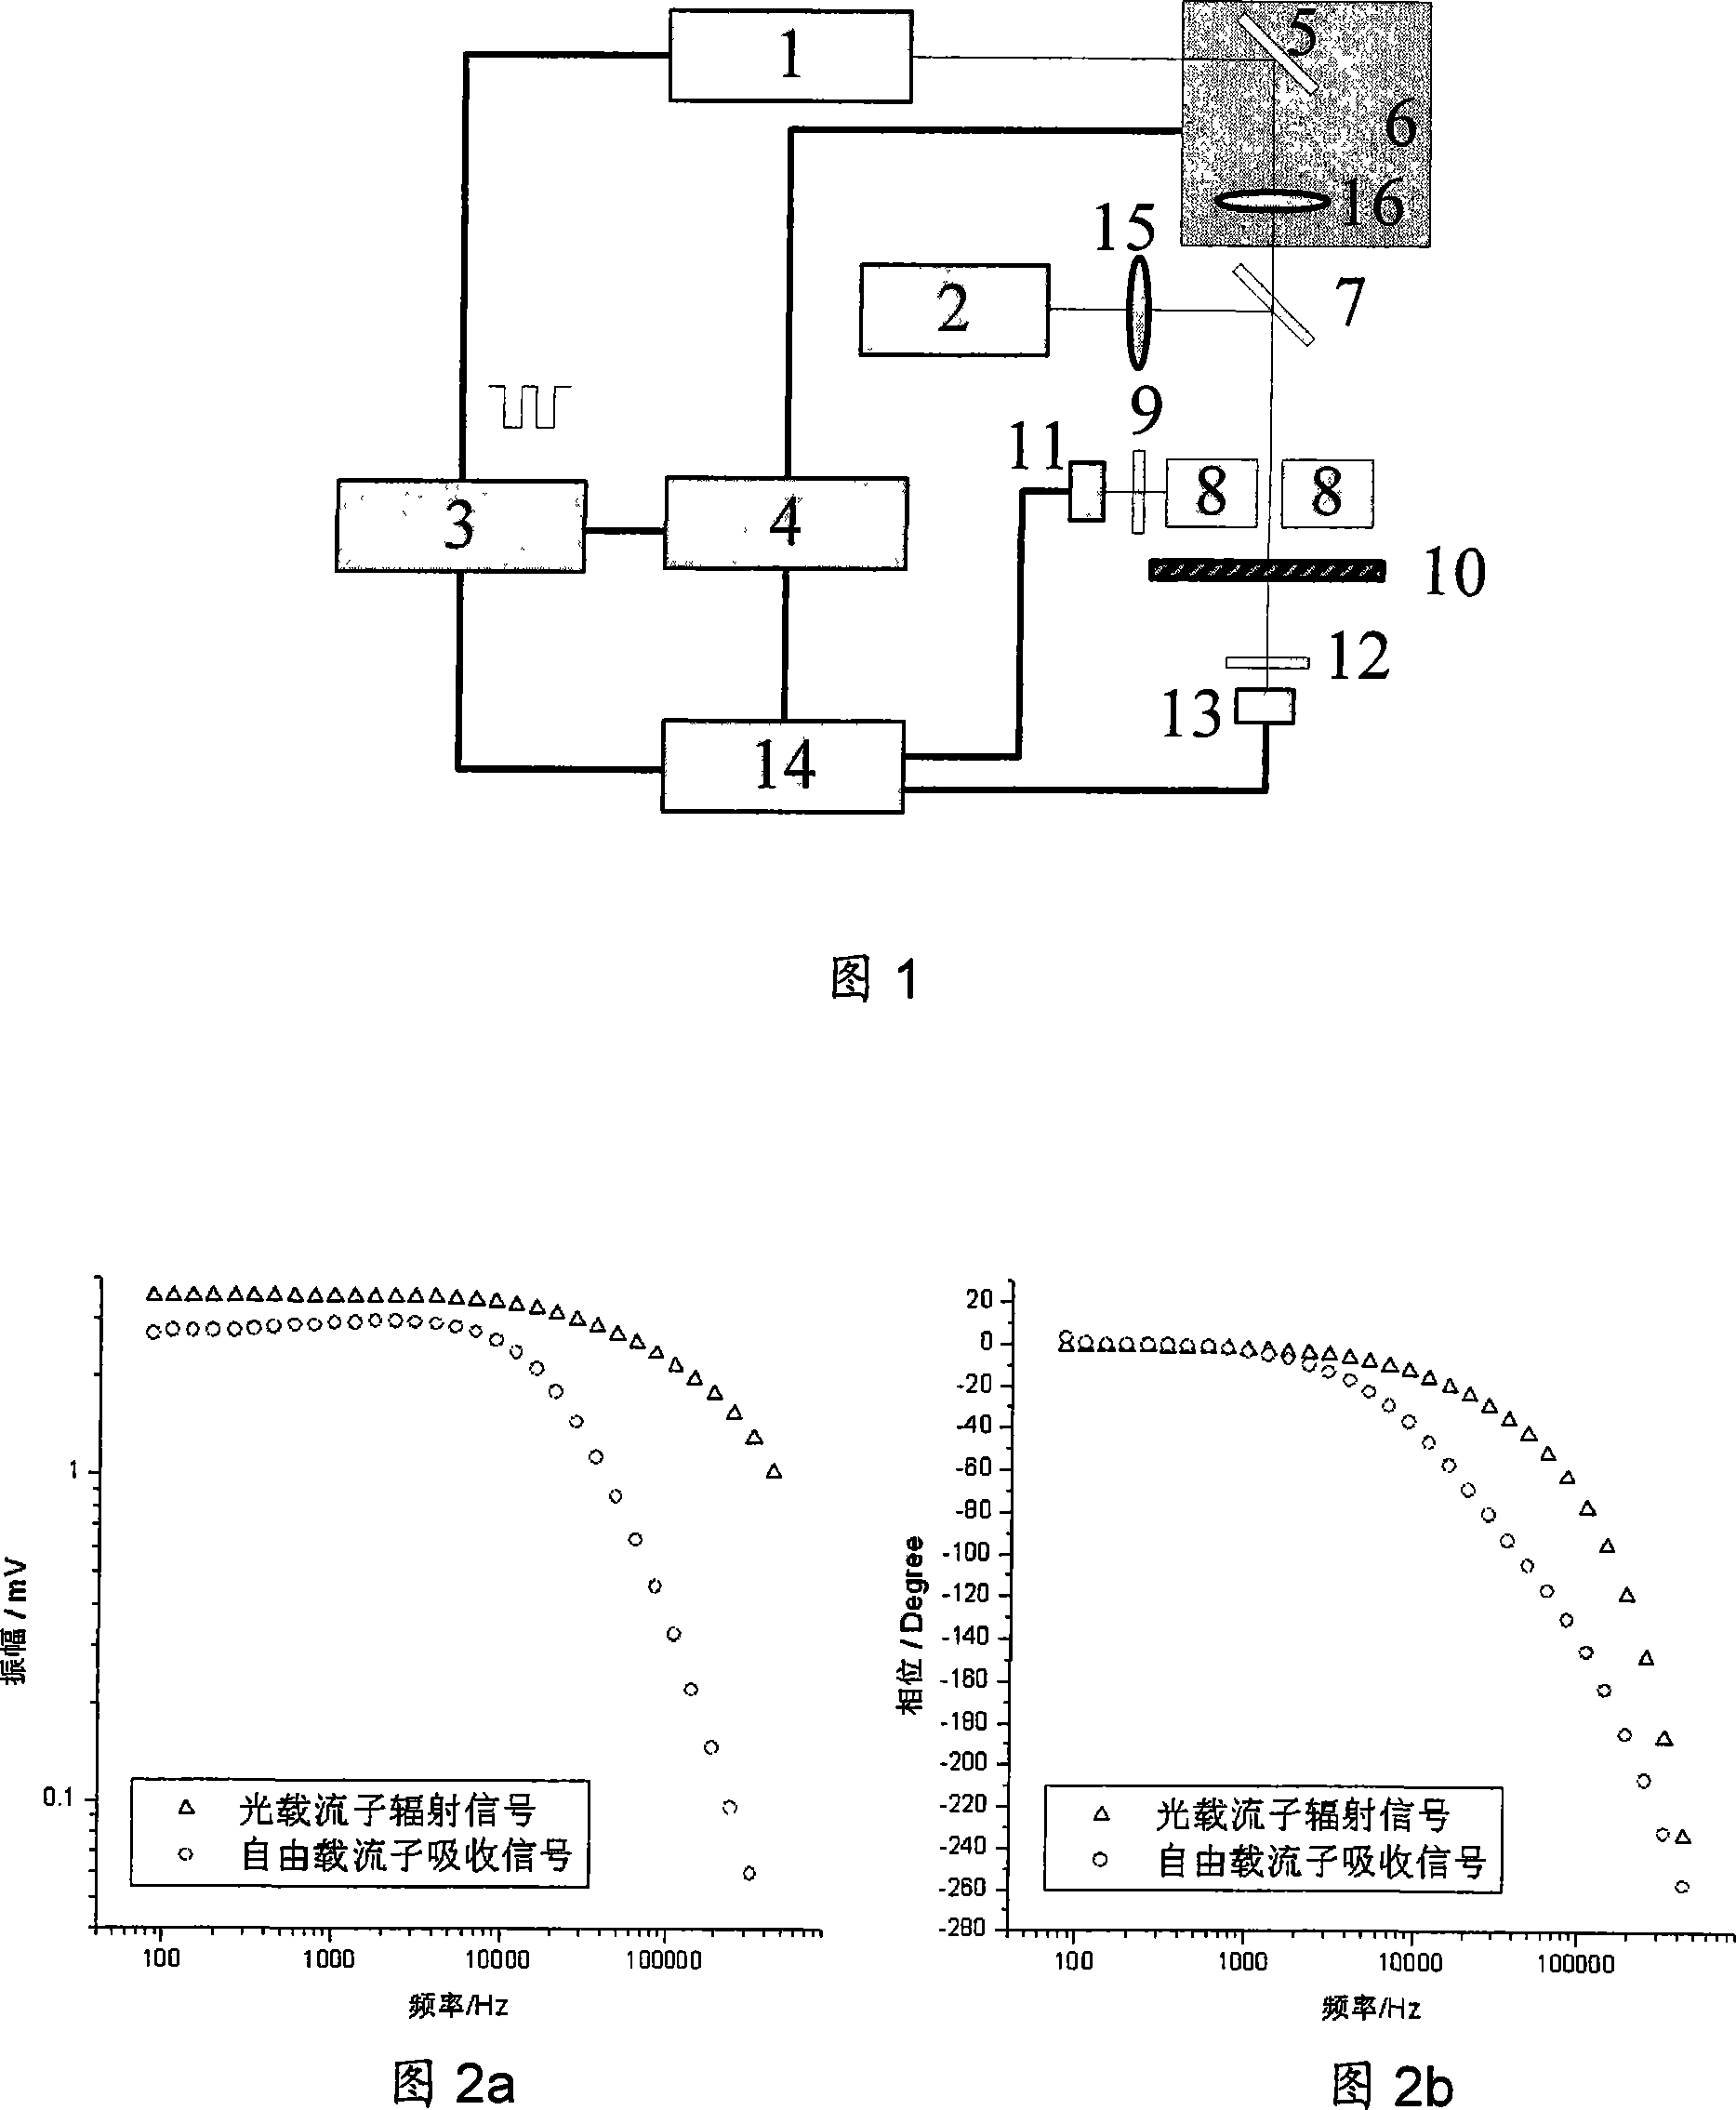 Method for measuring semiconductor doping concentration